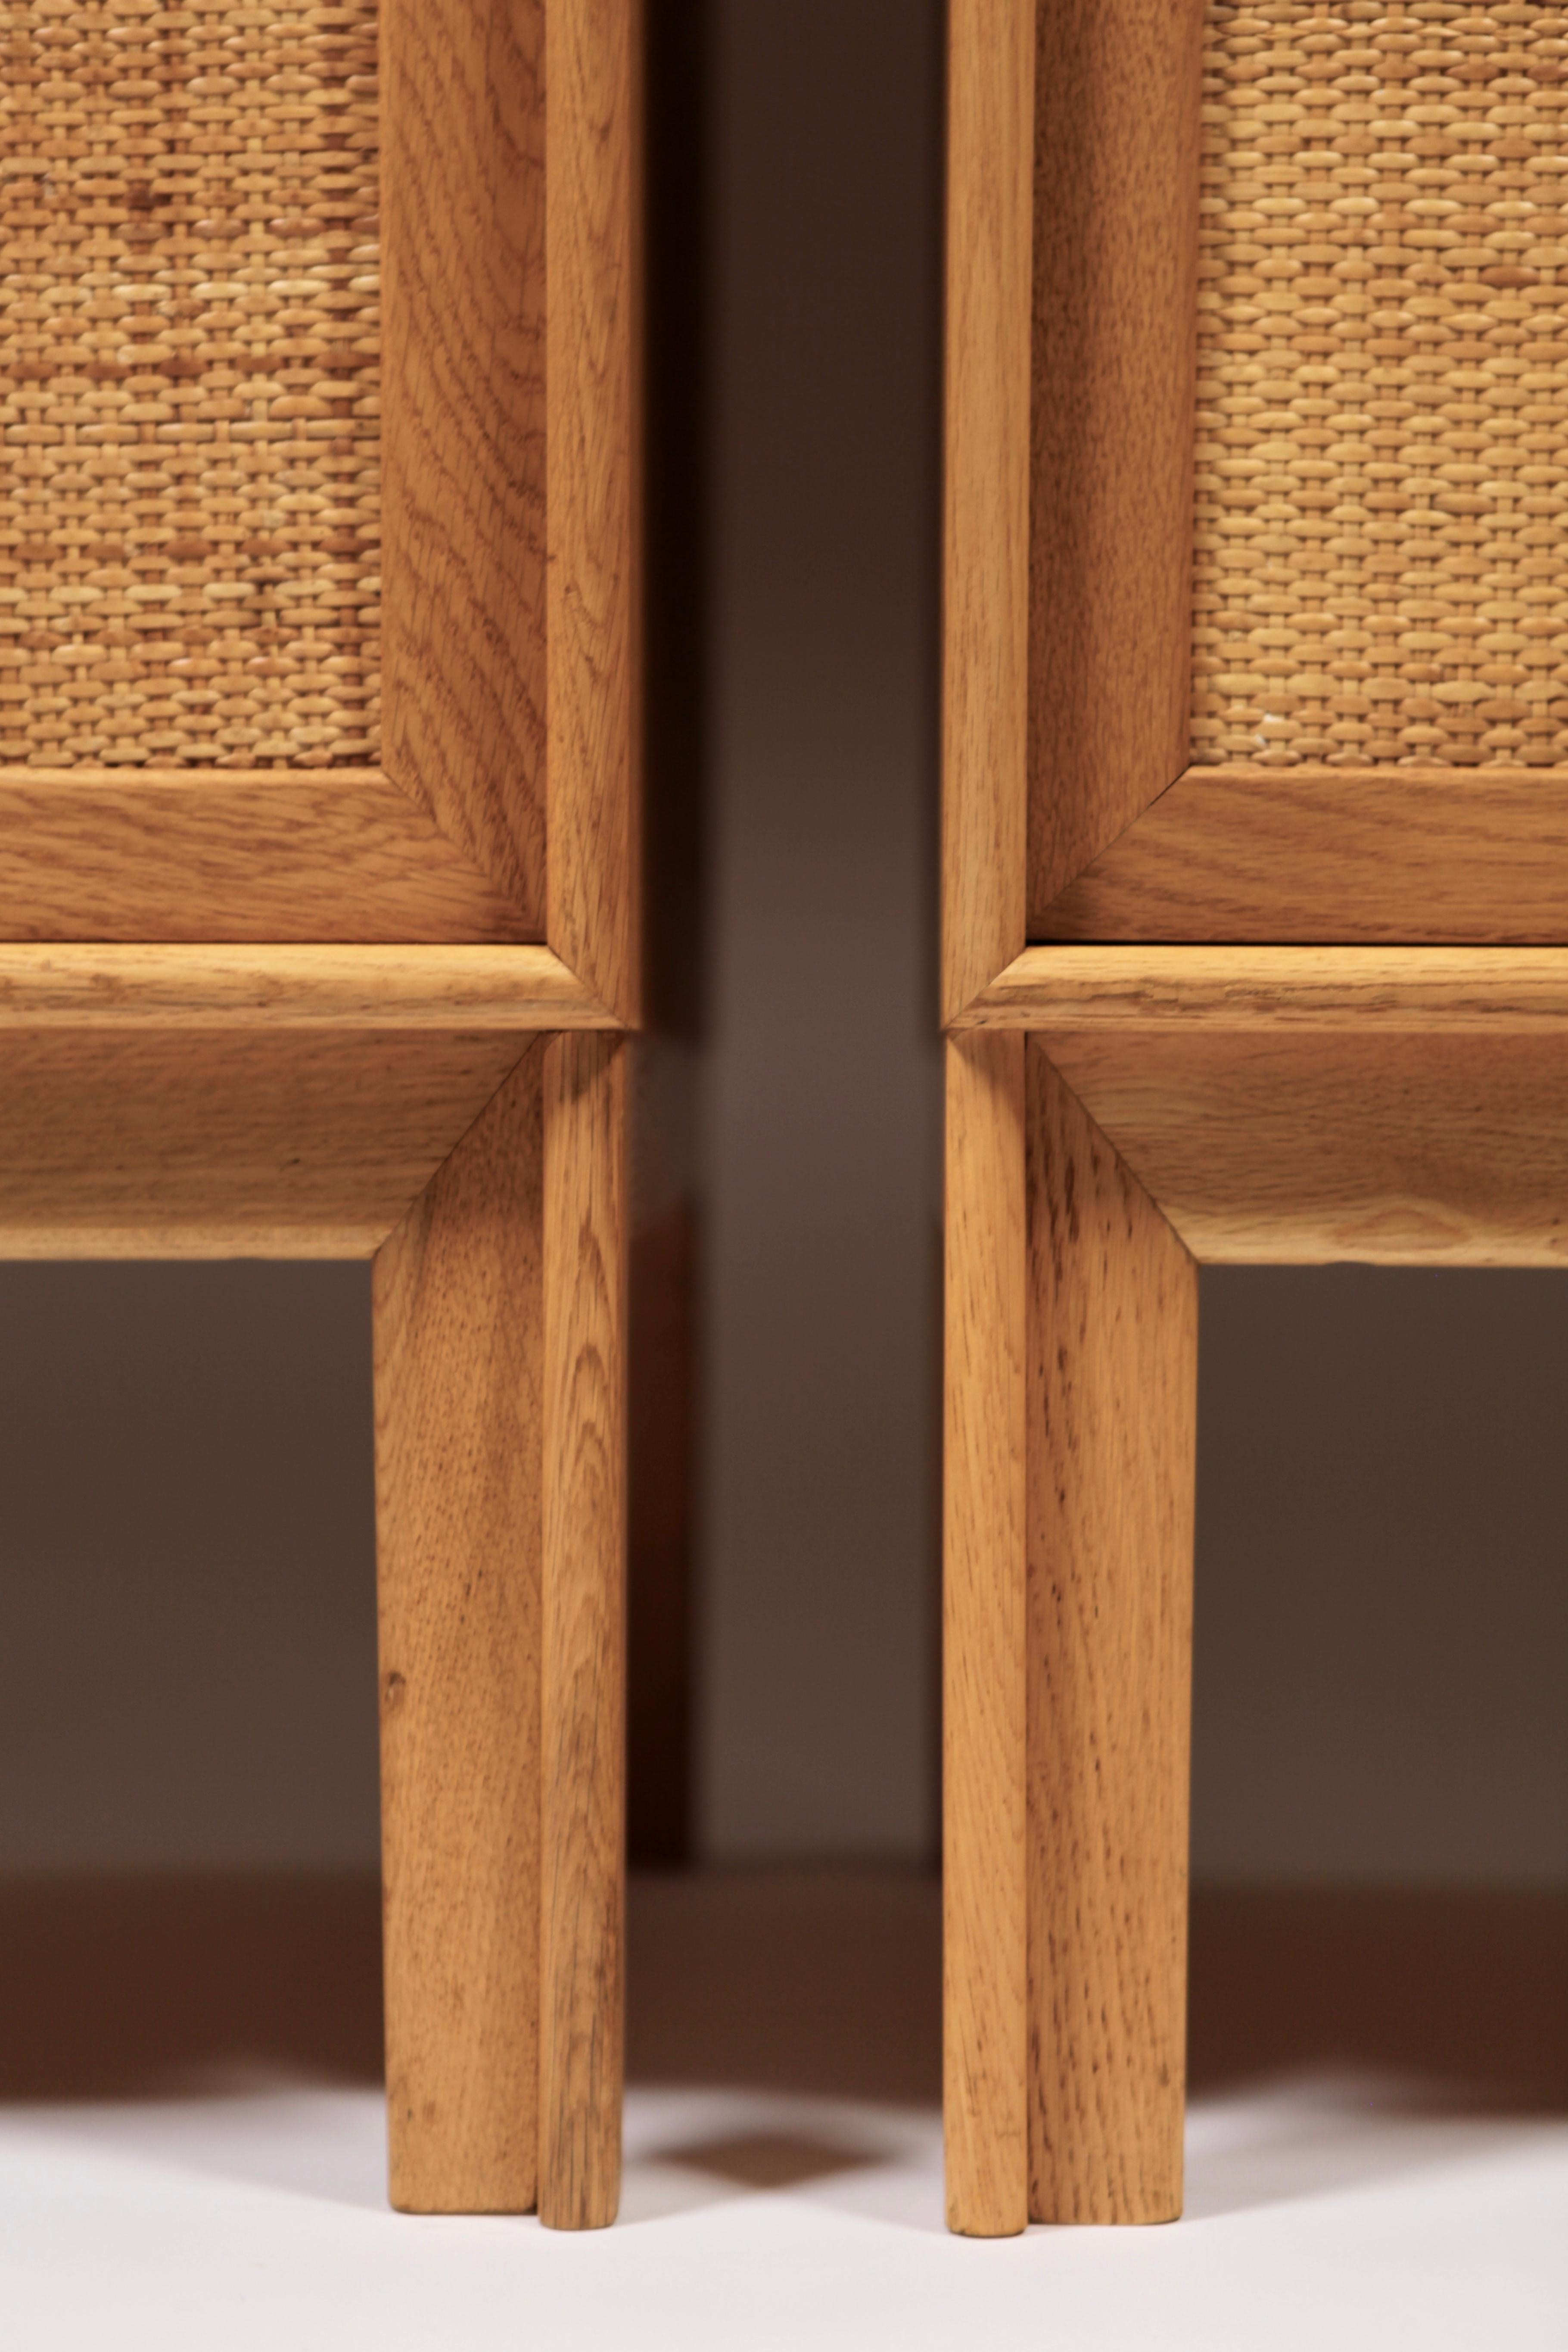 Swedish Pair of Sideboards with Bookcases in Oak and Cane by Alf Svensson, 1950s